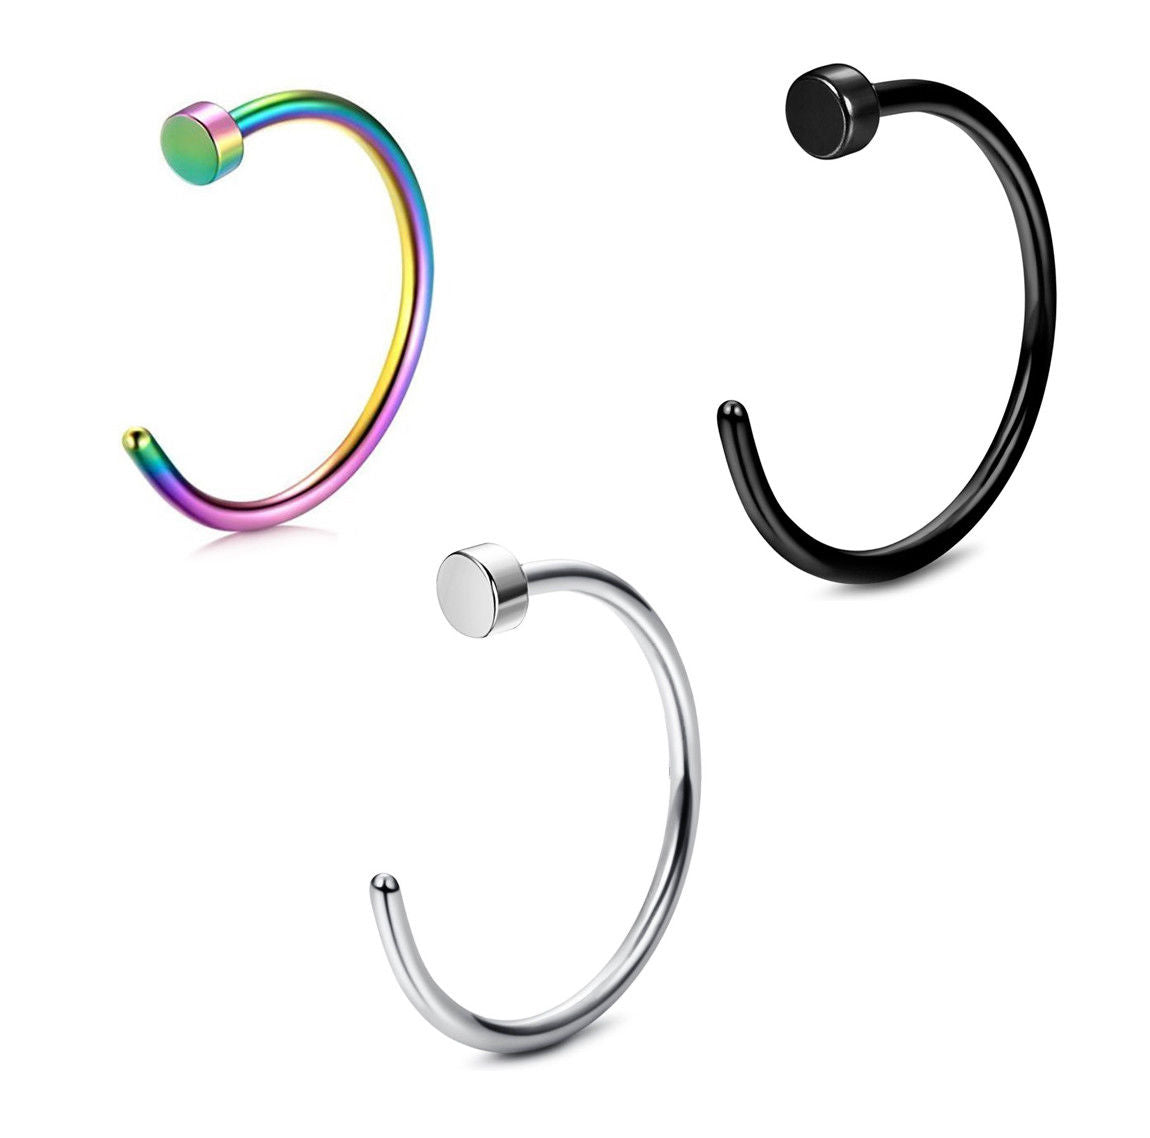 Nose Hoop Ring Pack of 3 Black, Surgical Steel and Multicolor made of S. Steel